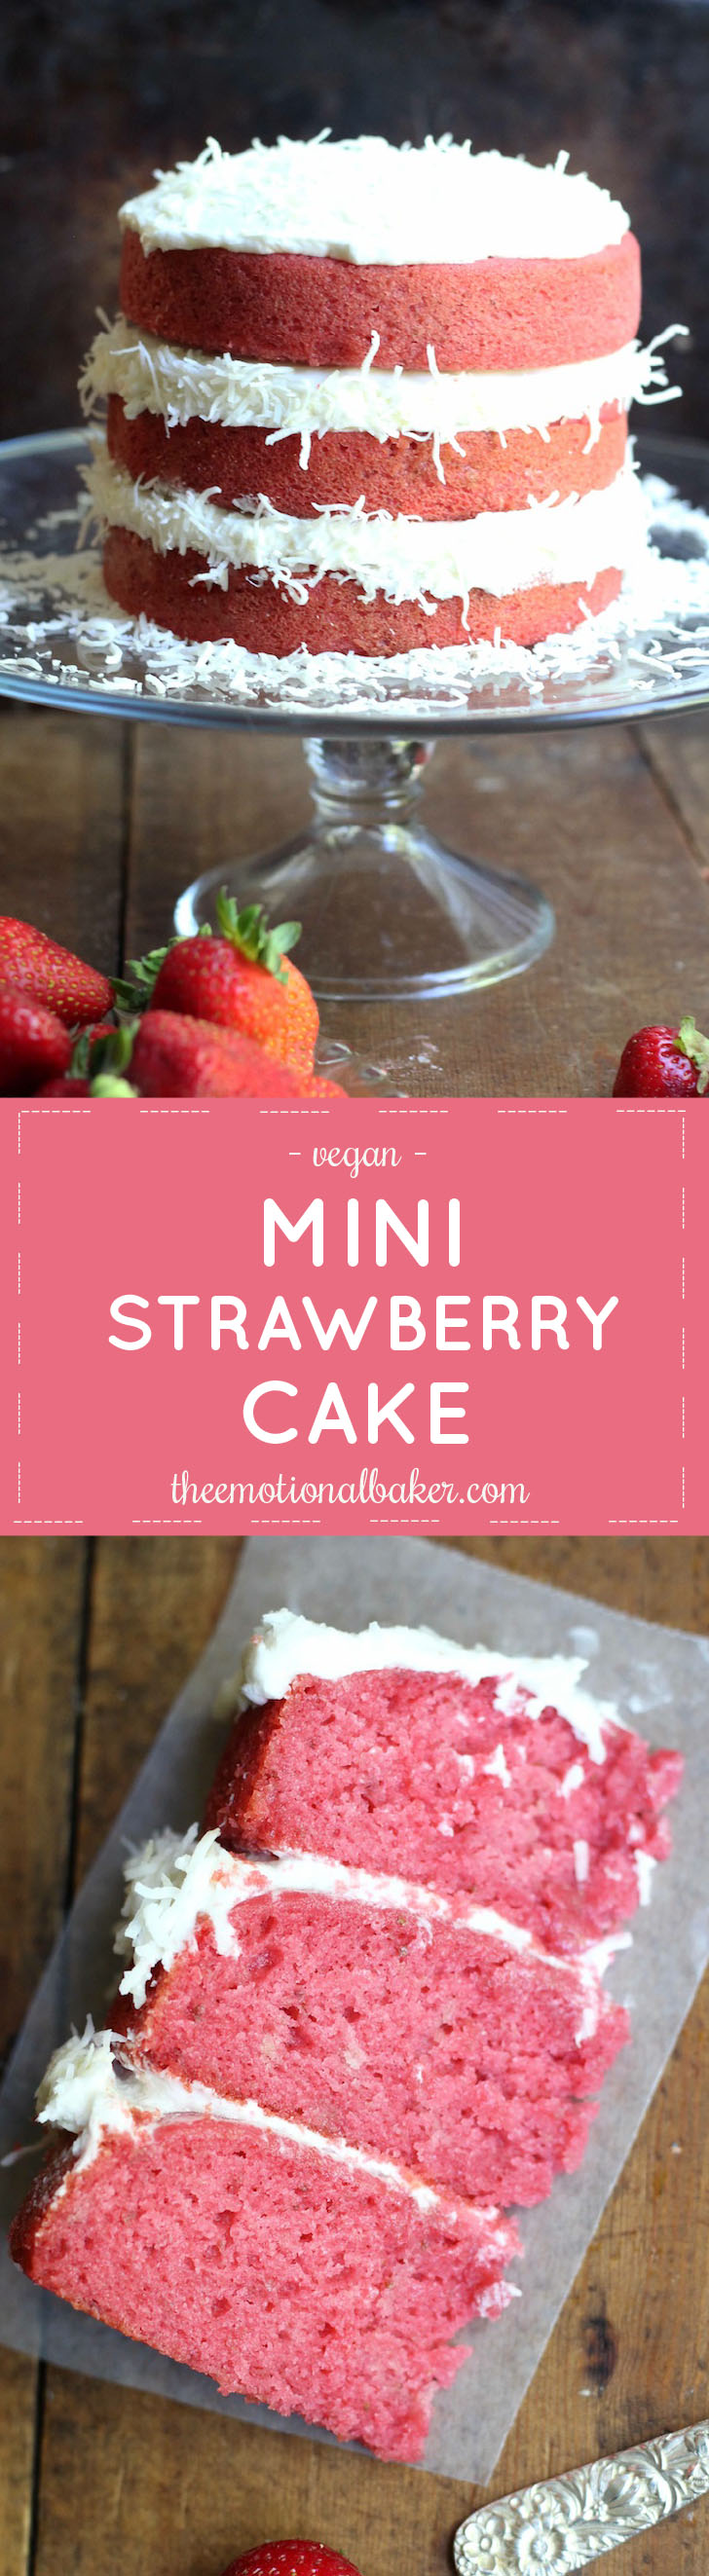 This 6 inch vegan strawberry cake is bursting with fresh strawberry flavor. It features layers of strawberry cake topped with coconut frosting.